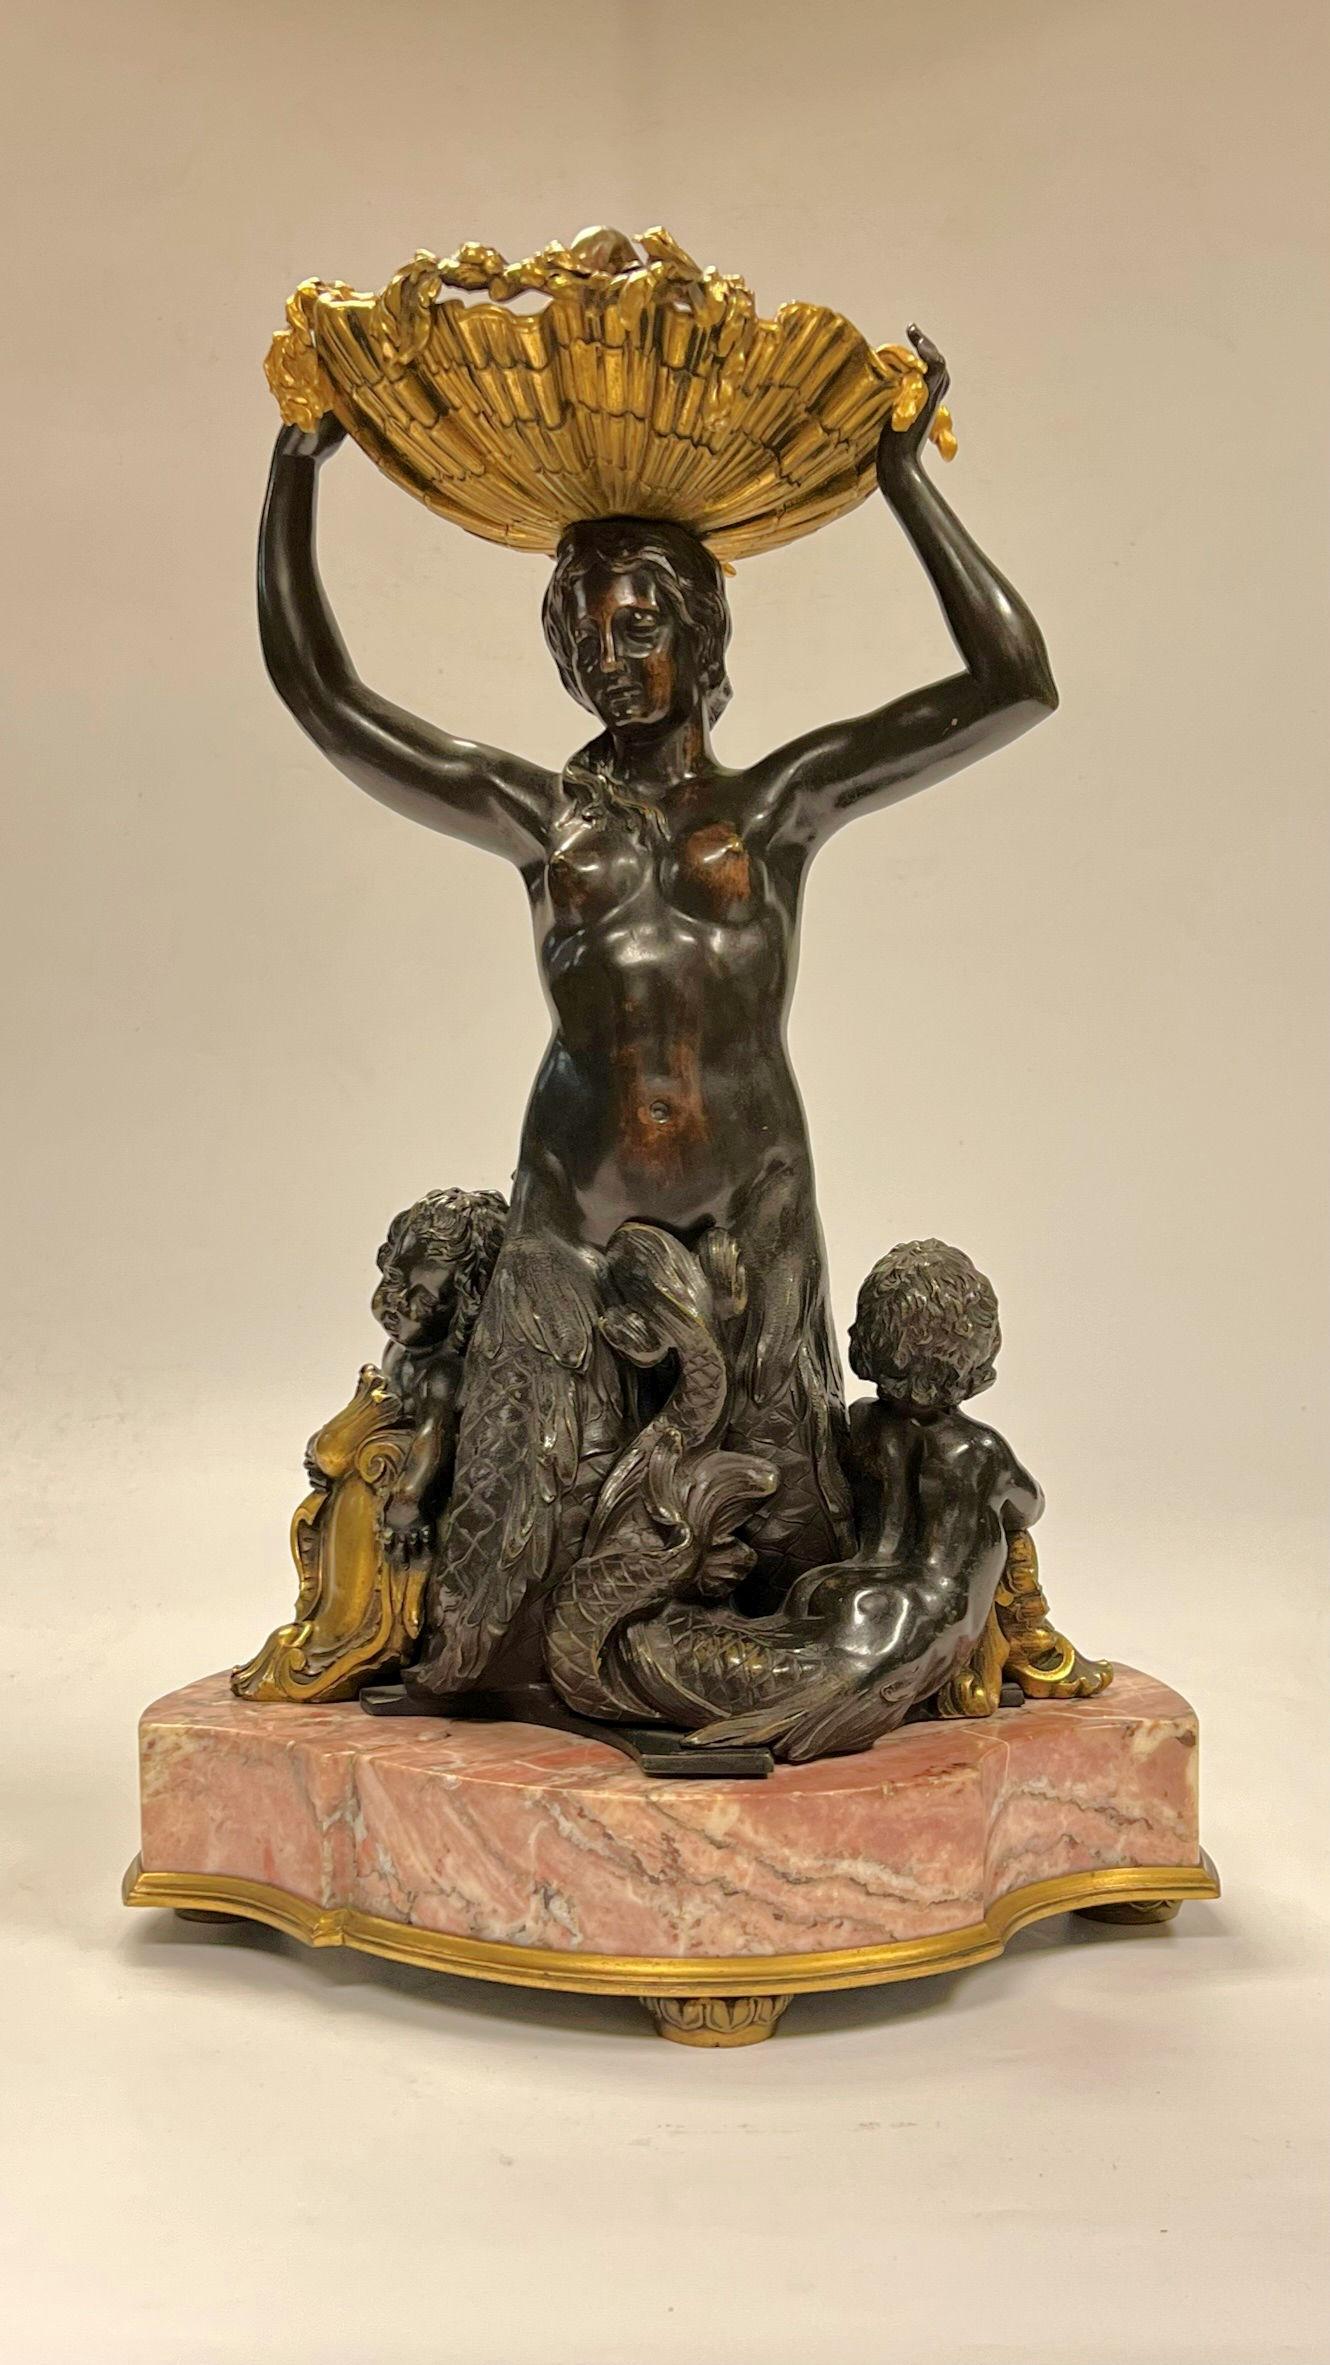 Gilt and patinated bronze centerpiece depicting a lovely mermaid supporting a seashell with stylized dolphin with cherubs (putti) at the base, mounted on a variegated pink marble pedestal and raised on gilt bronze feet.

This model appears at least